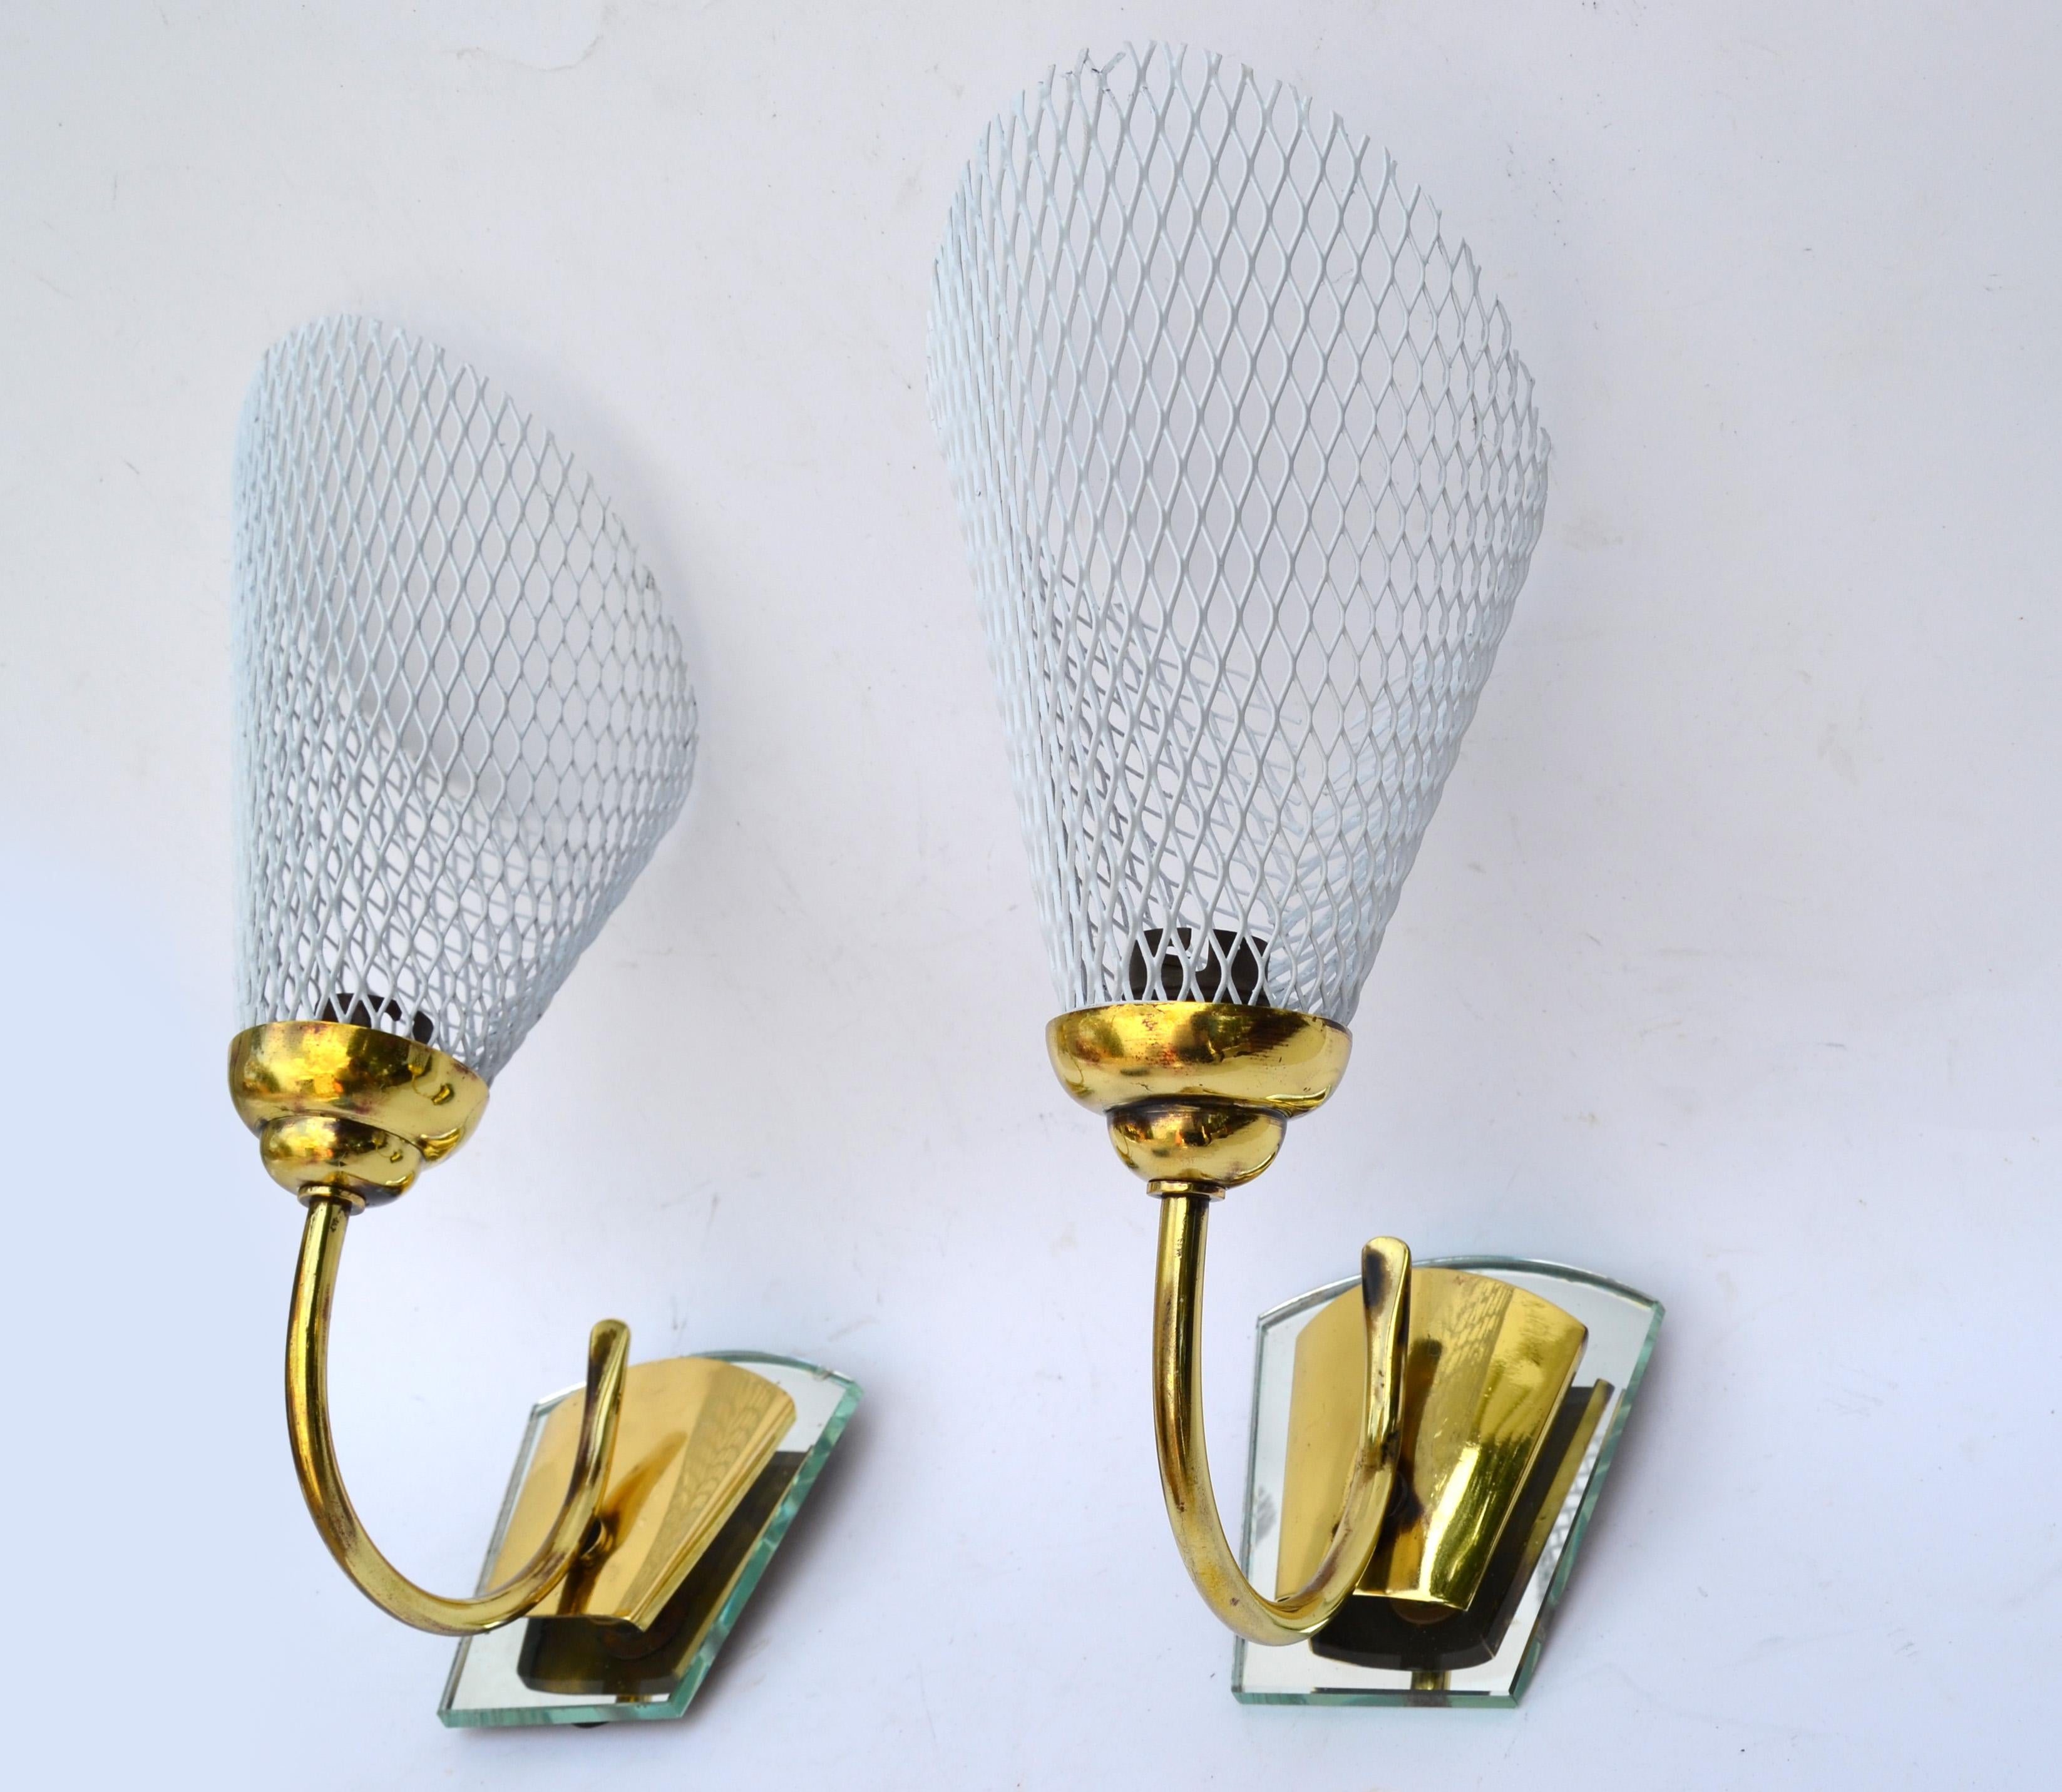 French Mathieu Matégot Sconces Brass, Mirror & White Metal Mesh Shades Wall Lamps, Pair For Sale